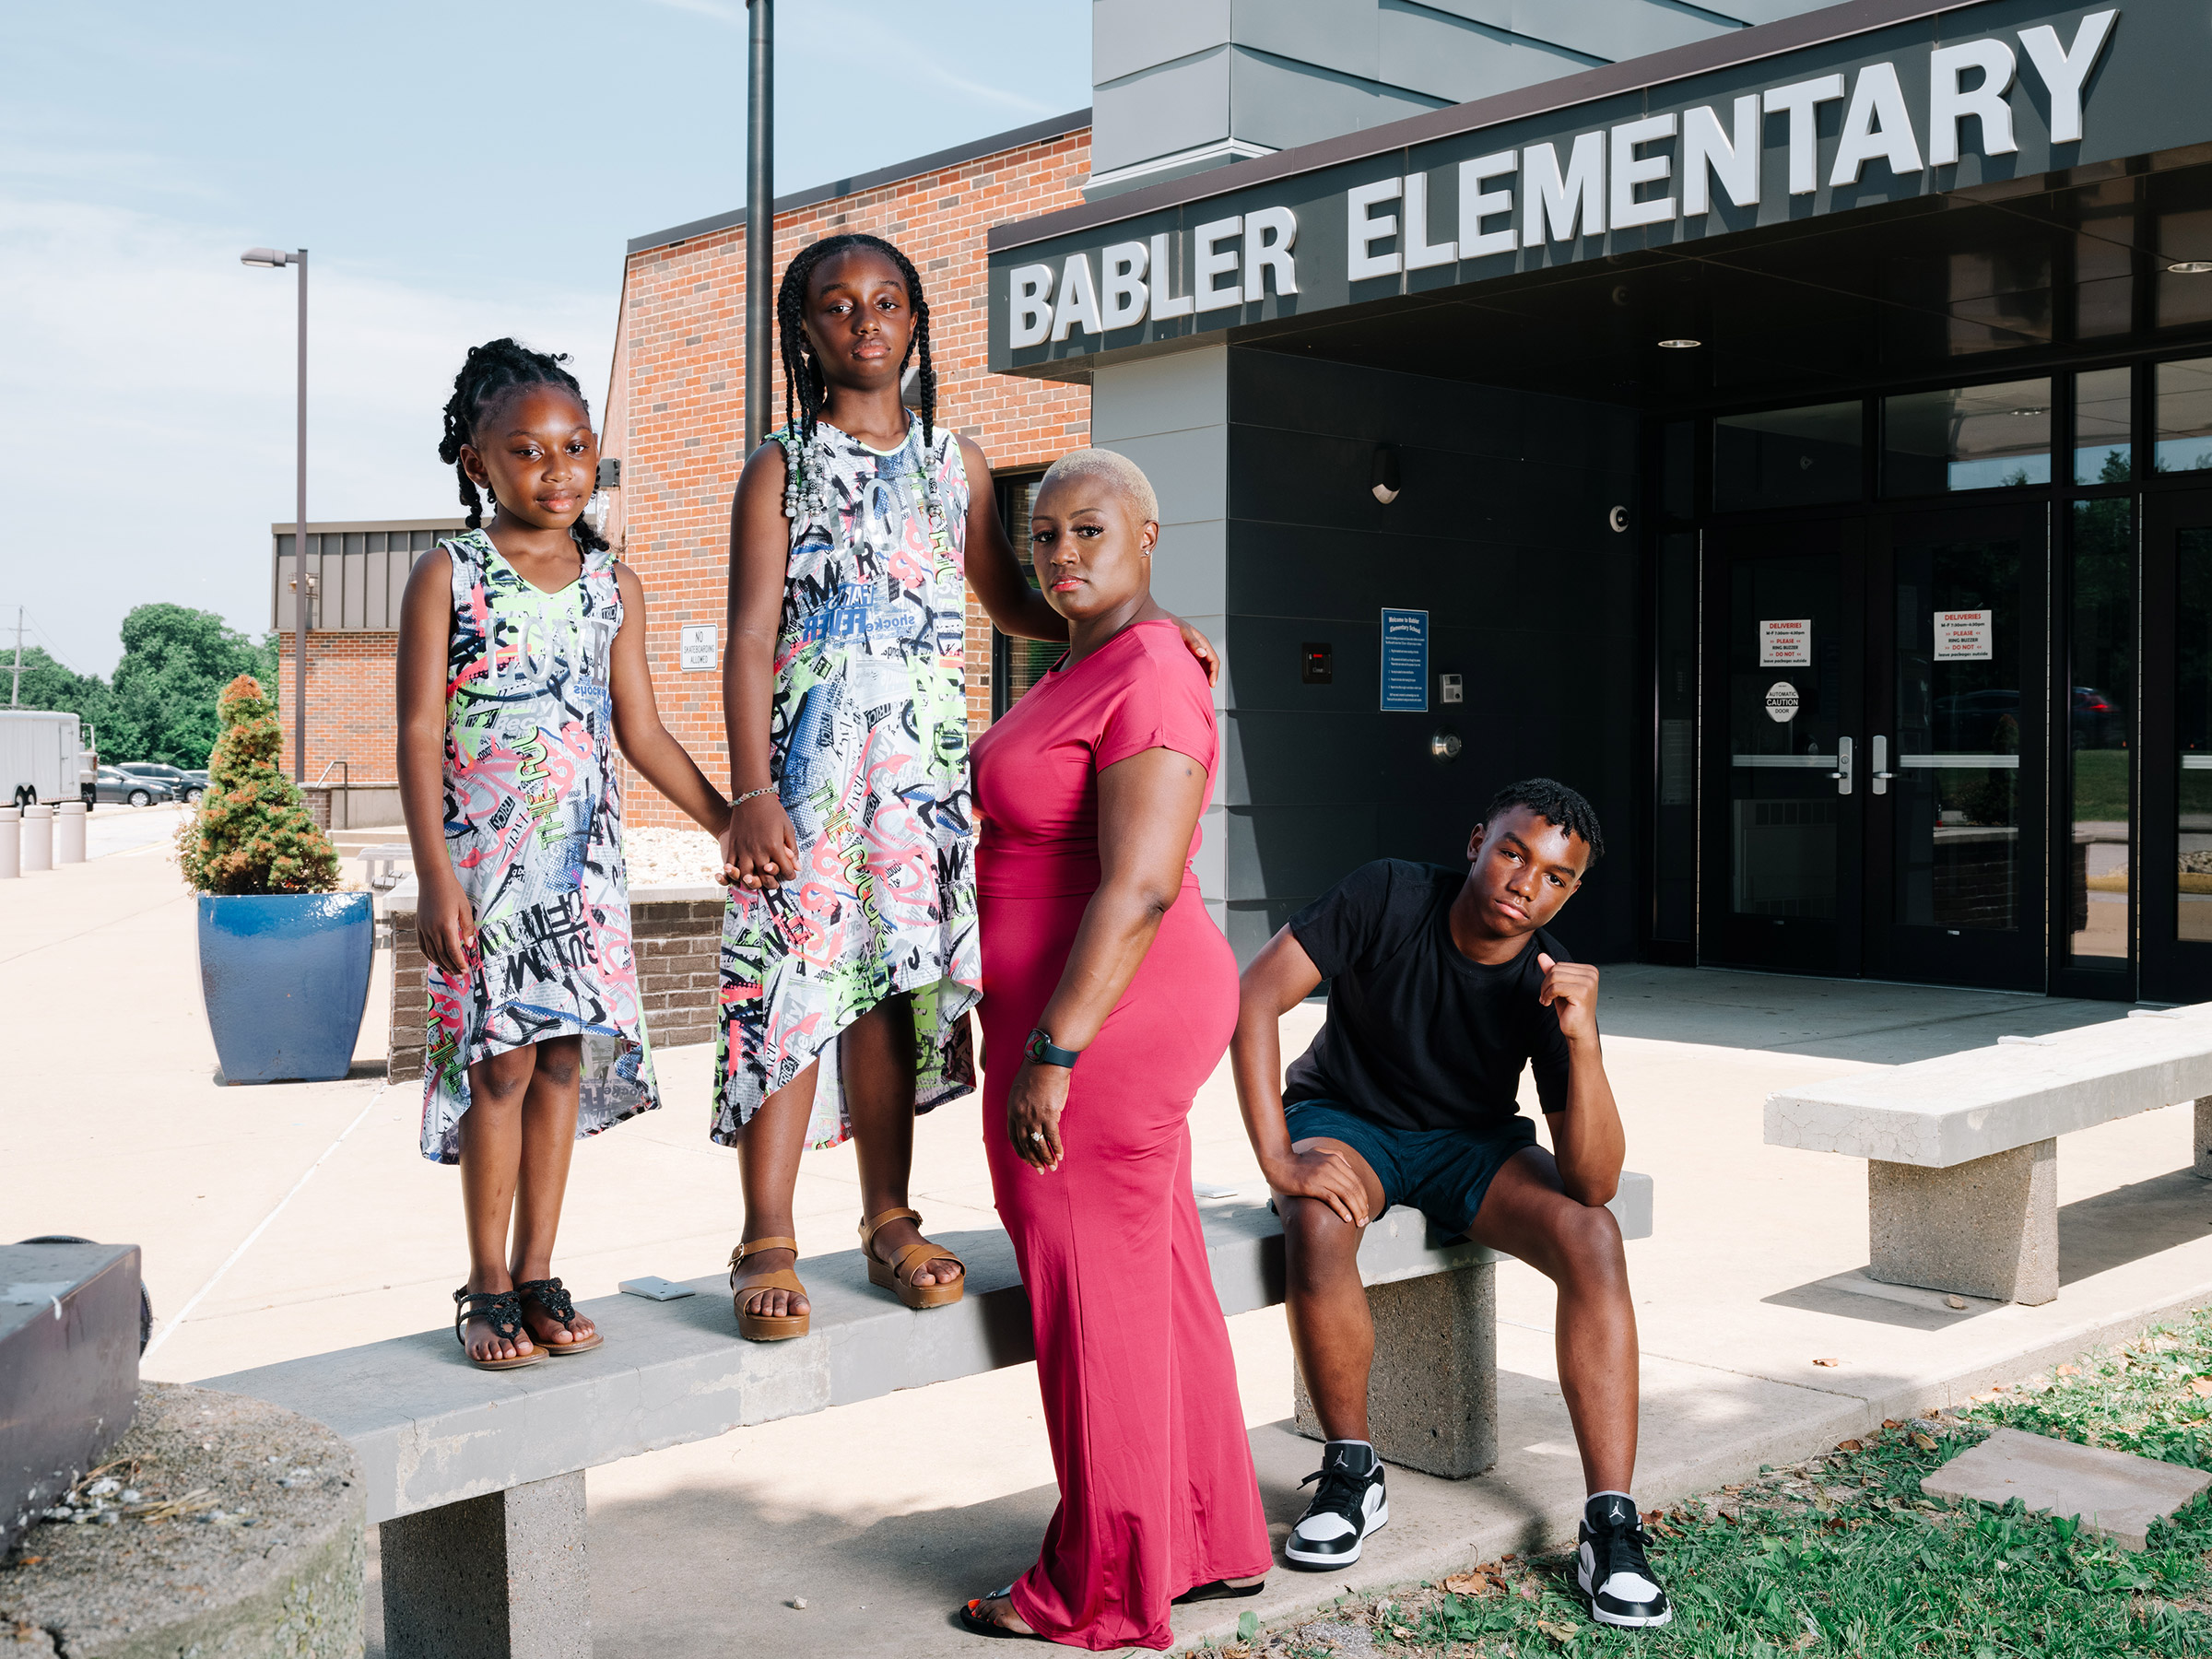 <strong>Shemia Reese with her family</strong> at Babler Elementary in Glencoe, Mo. "<a href="https://time.com/6075193/critical-race-theory-debate/">Inside the Fight Over What Kids Learn About America's History</a>," July 5 issue. (David Kasnic for TIME)